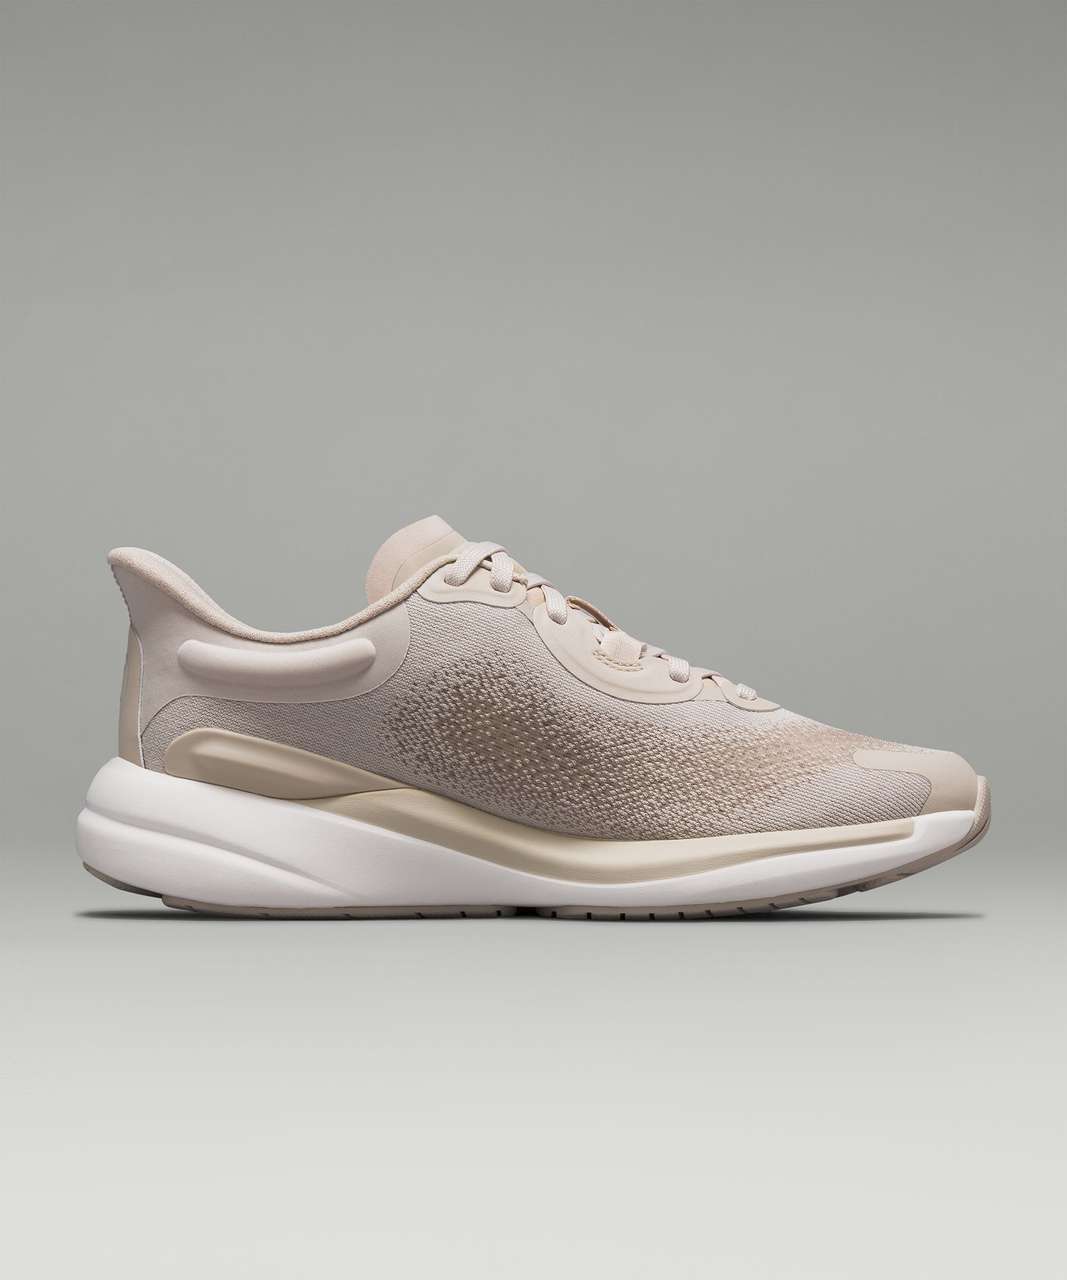 Lululemon Chargefeel 2 Low Womens Workout Shoe - Baked Clay / Baked Clay / White